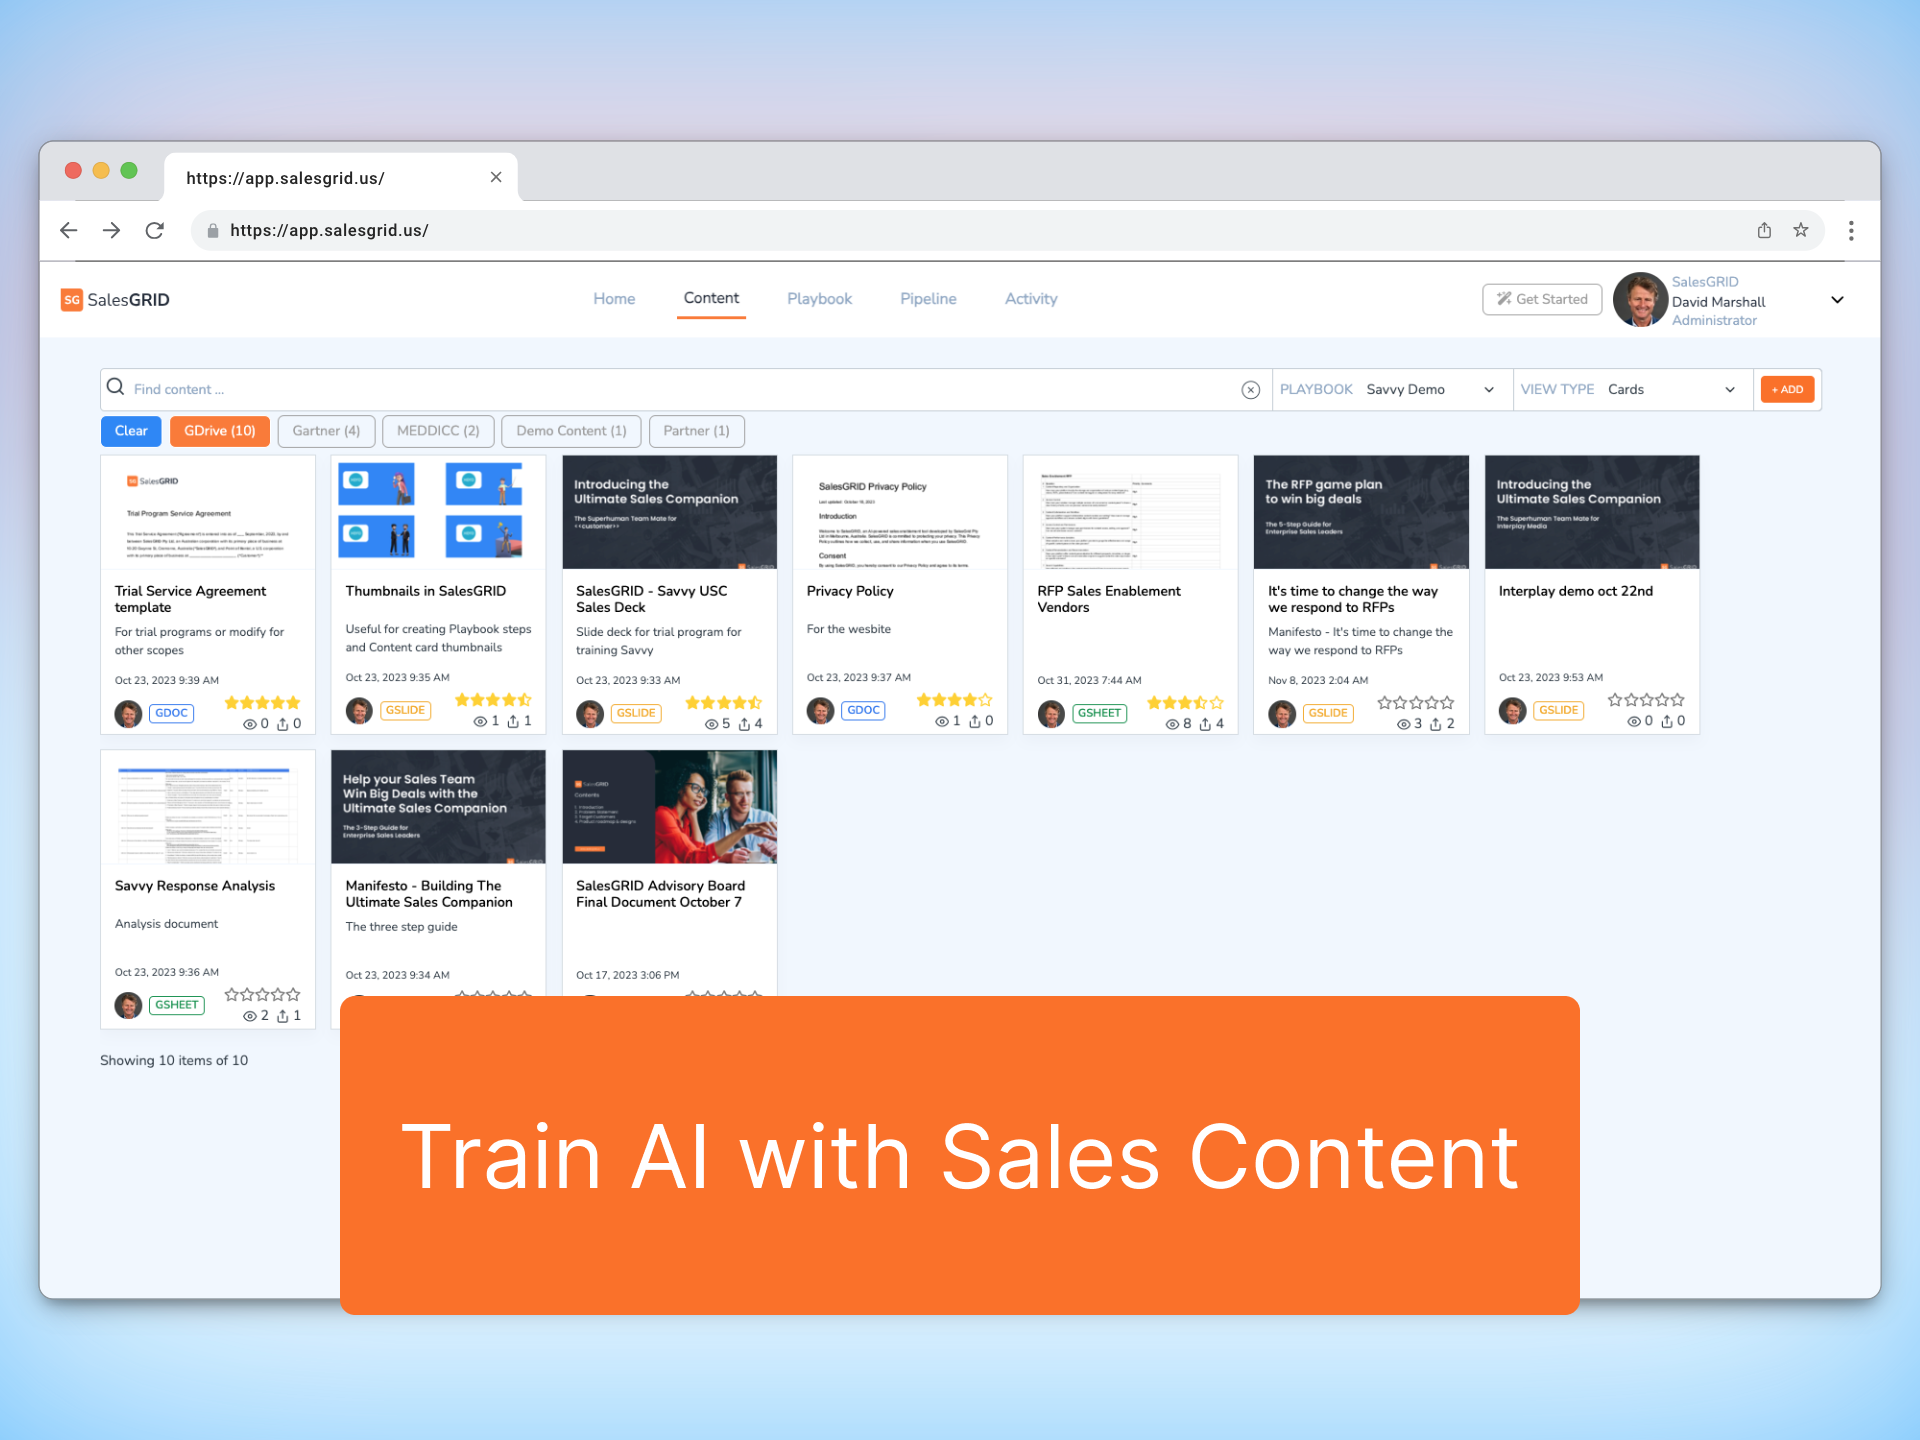 Train AI with Sales Content